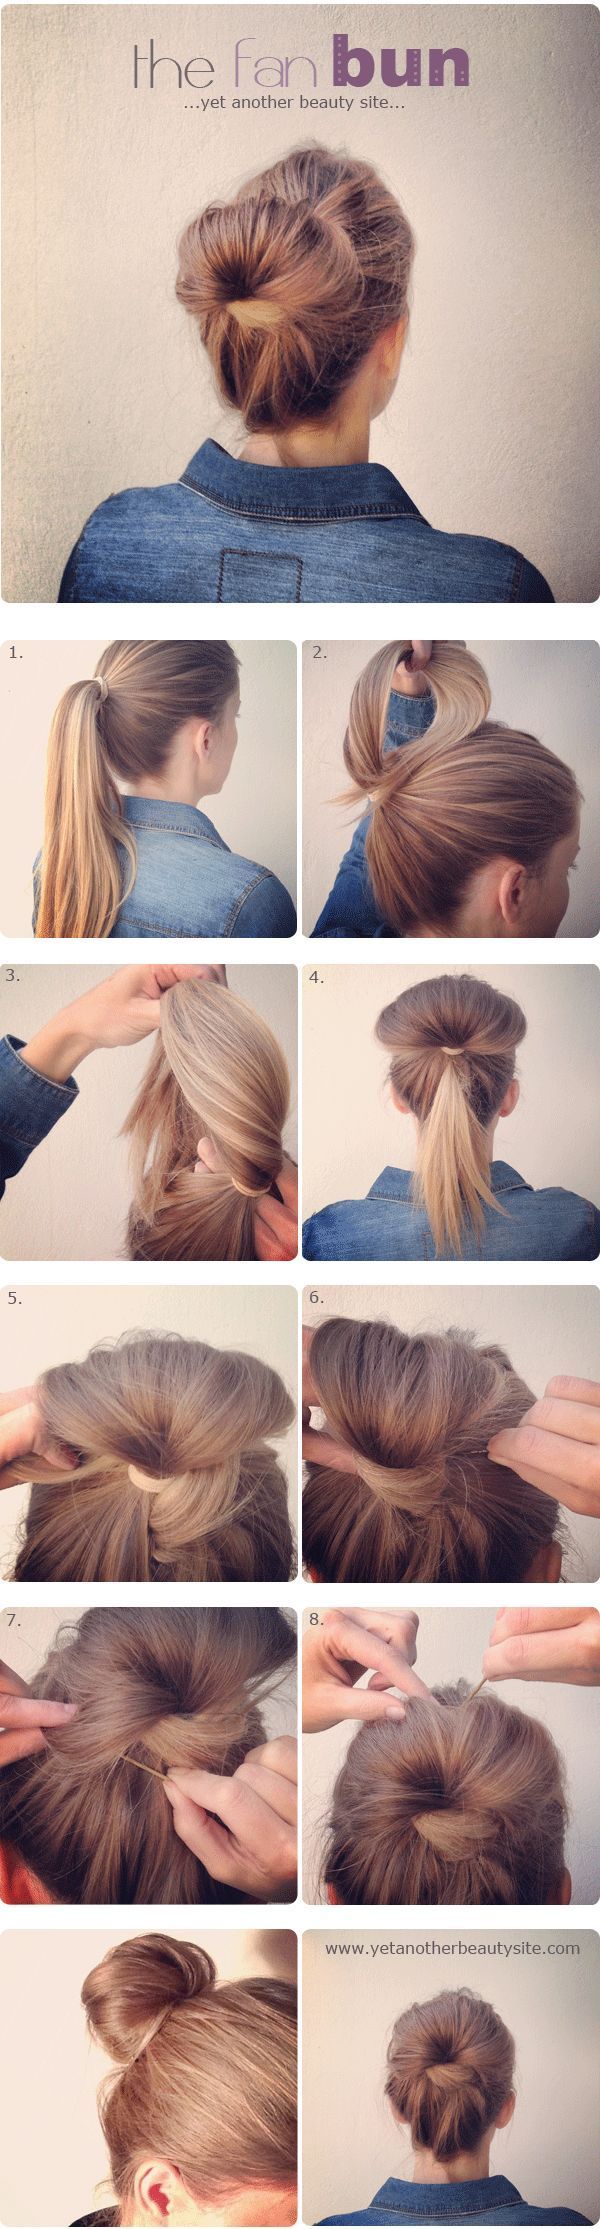 quick easy up-do for everyday activities. The fan bun tutorial step by step. Dif...